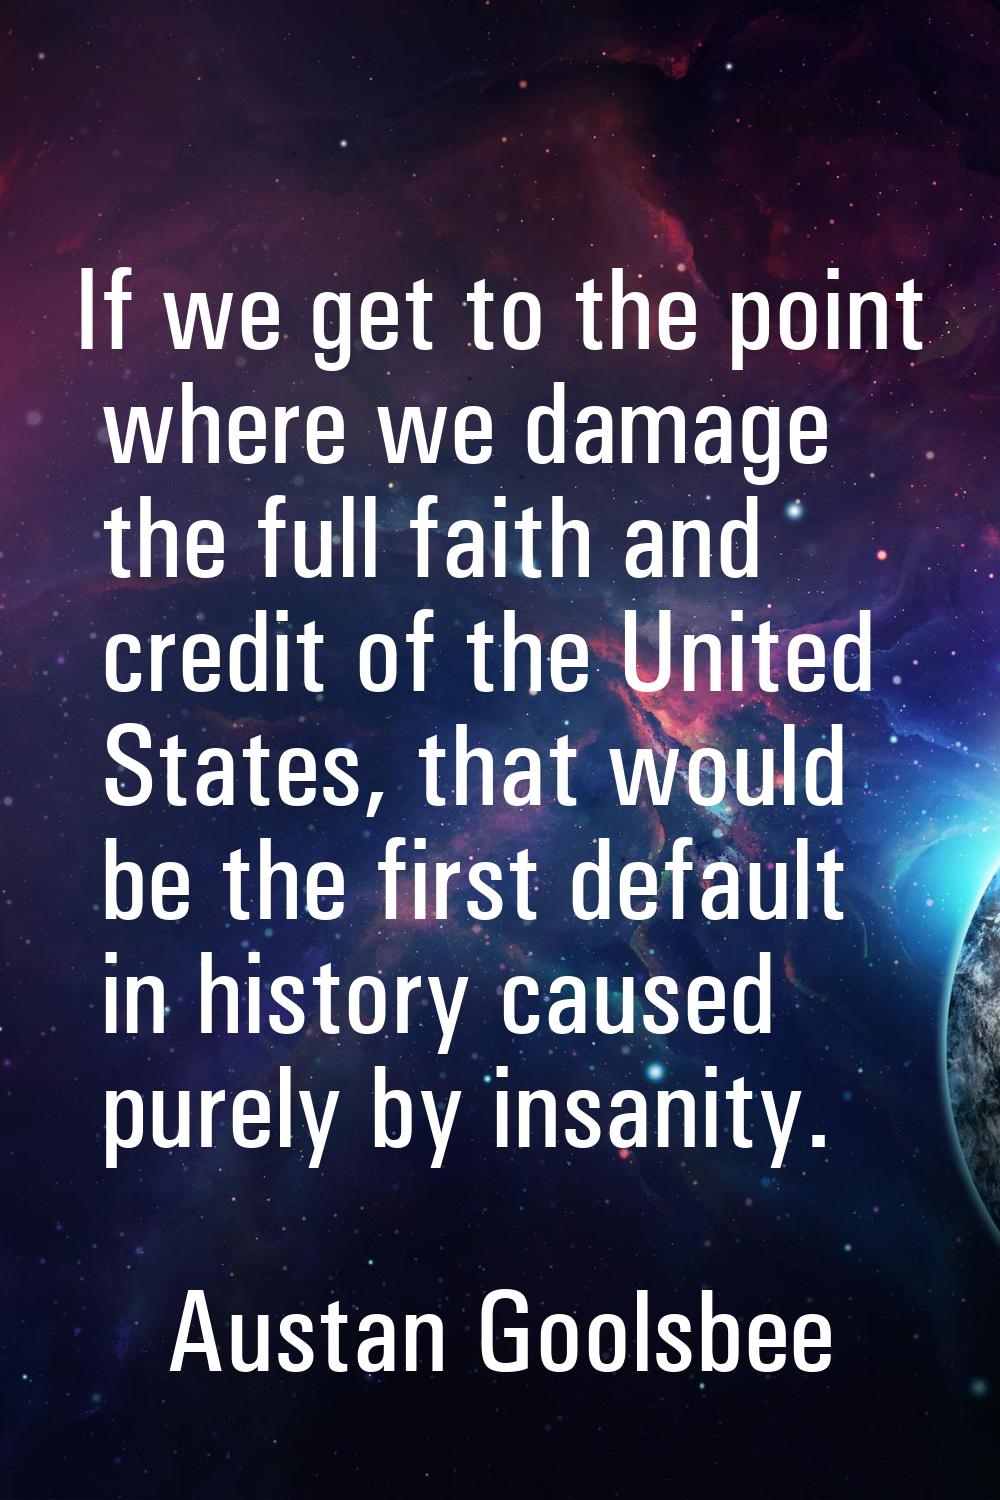 If we get to the point where we damage the full faith and credit of the United States, that would b